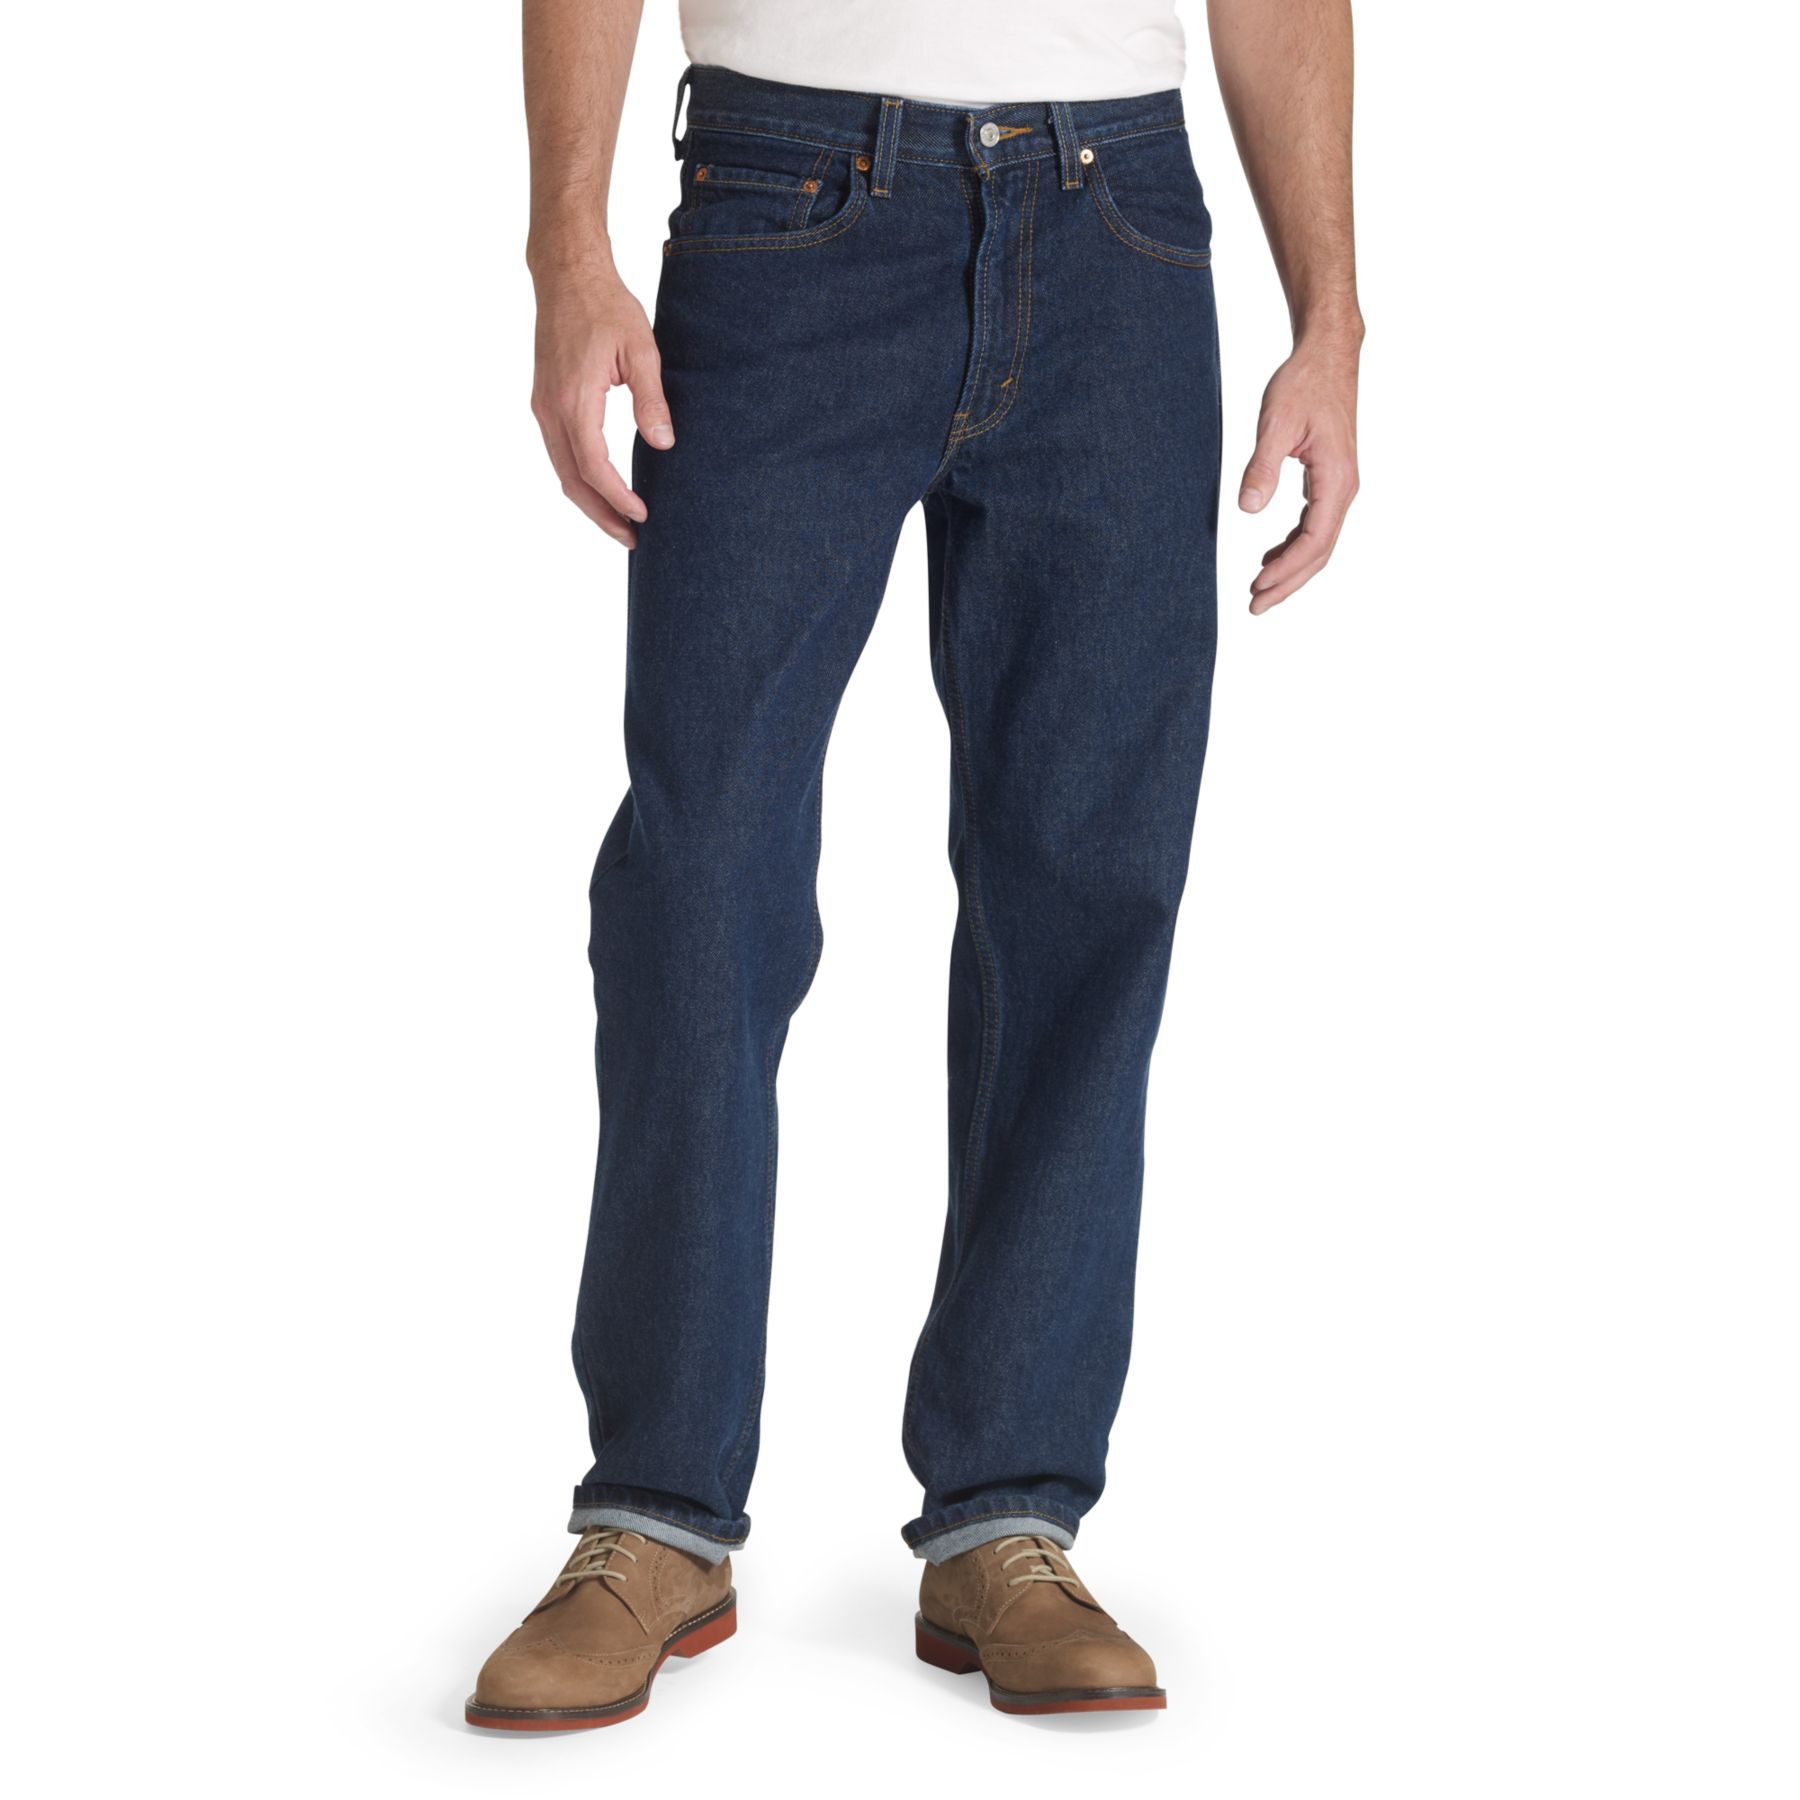 Levi's Men's 550 Relaxed Fit Jeans - Sears